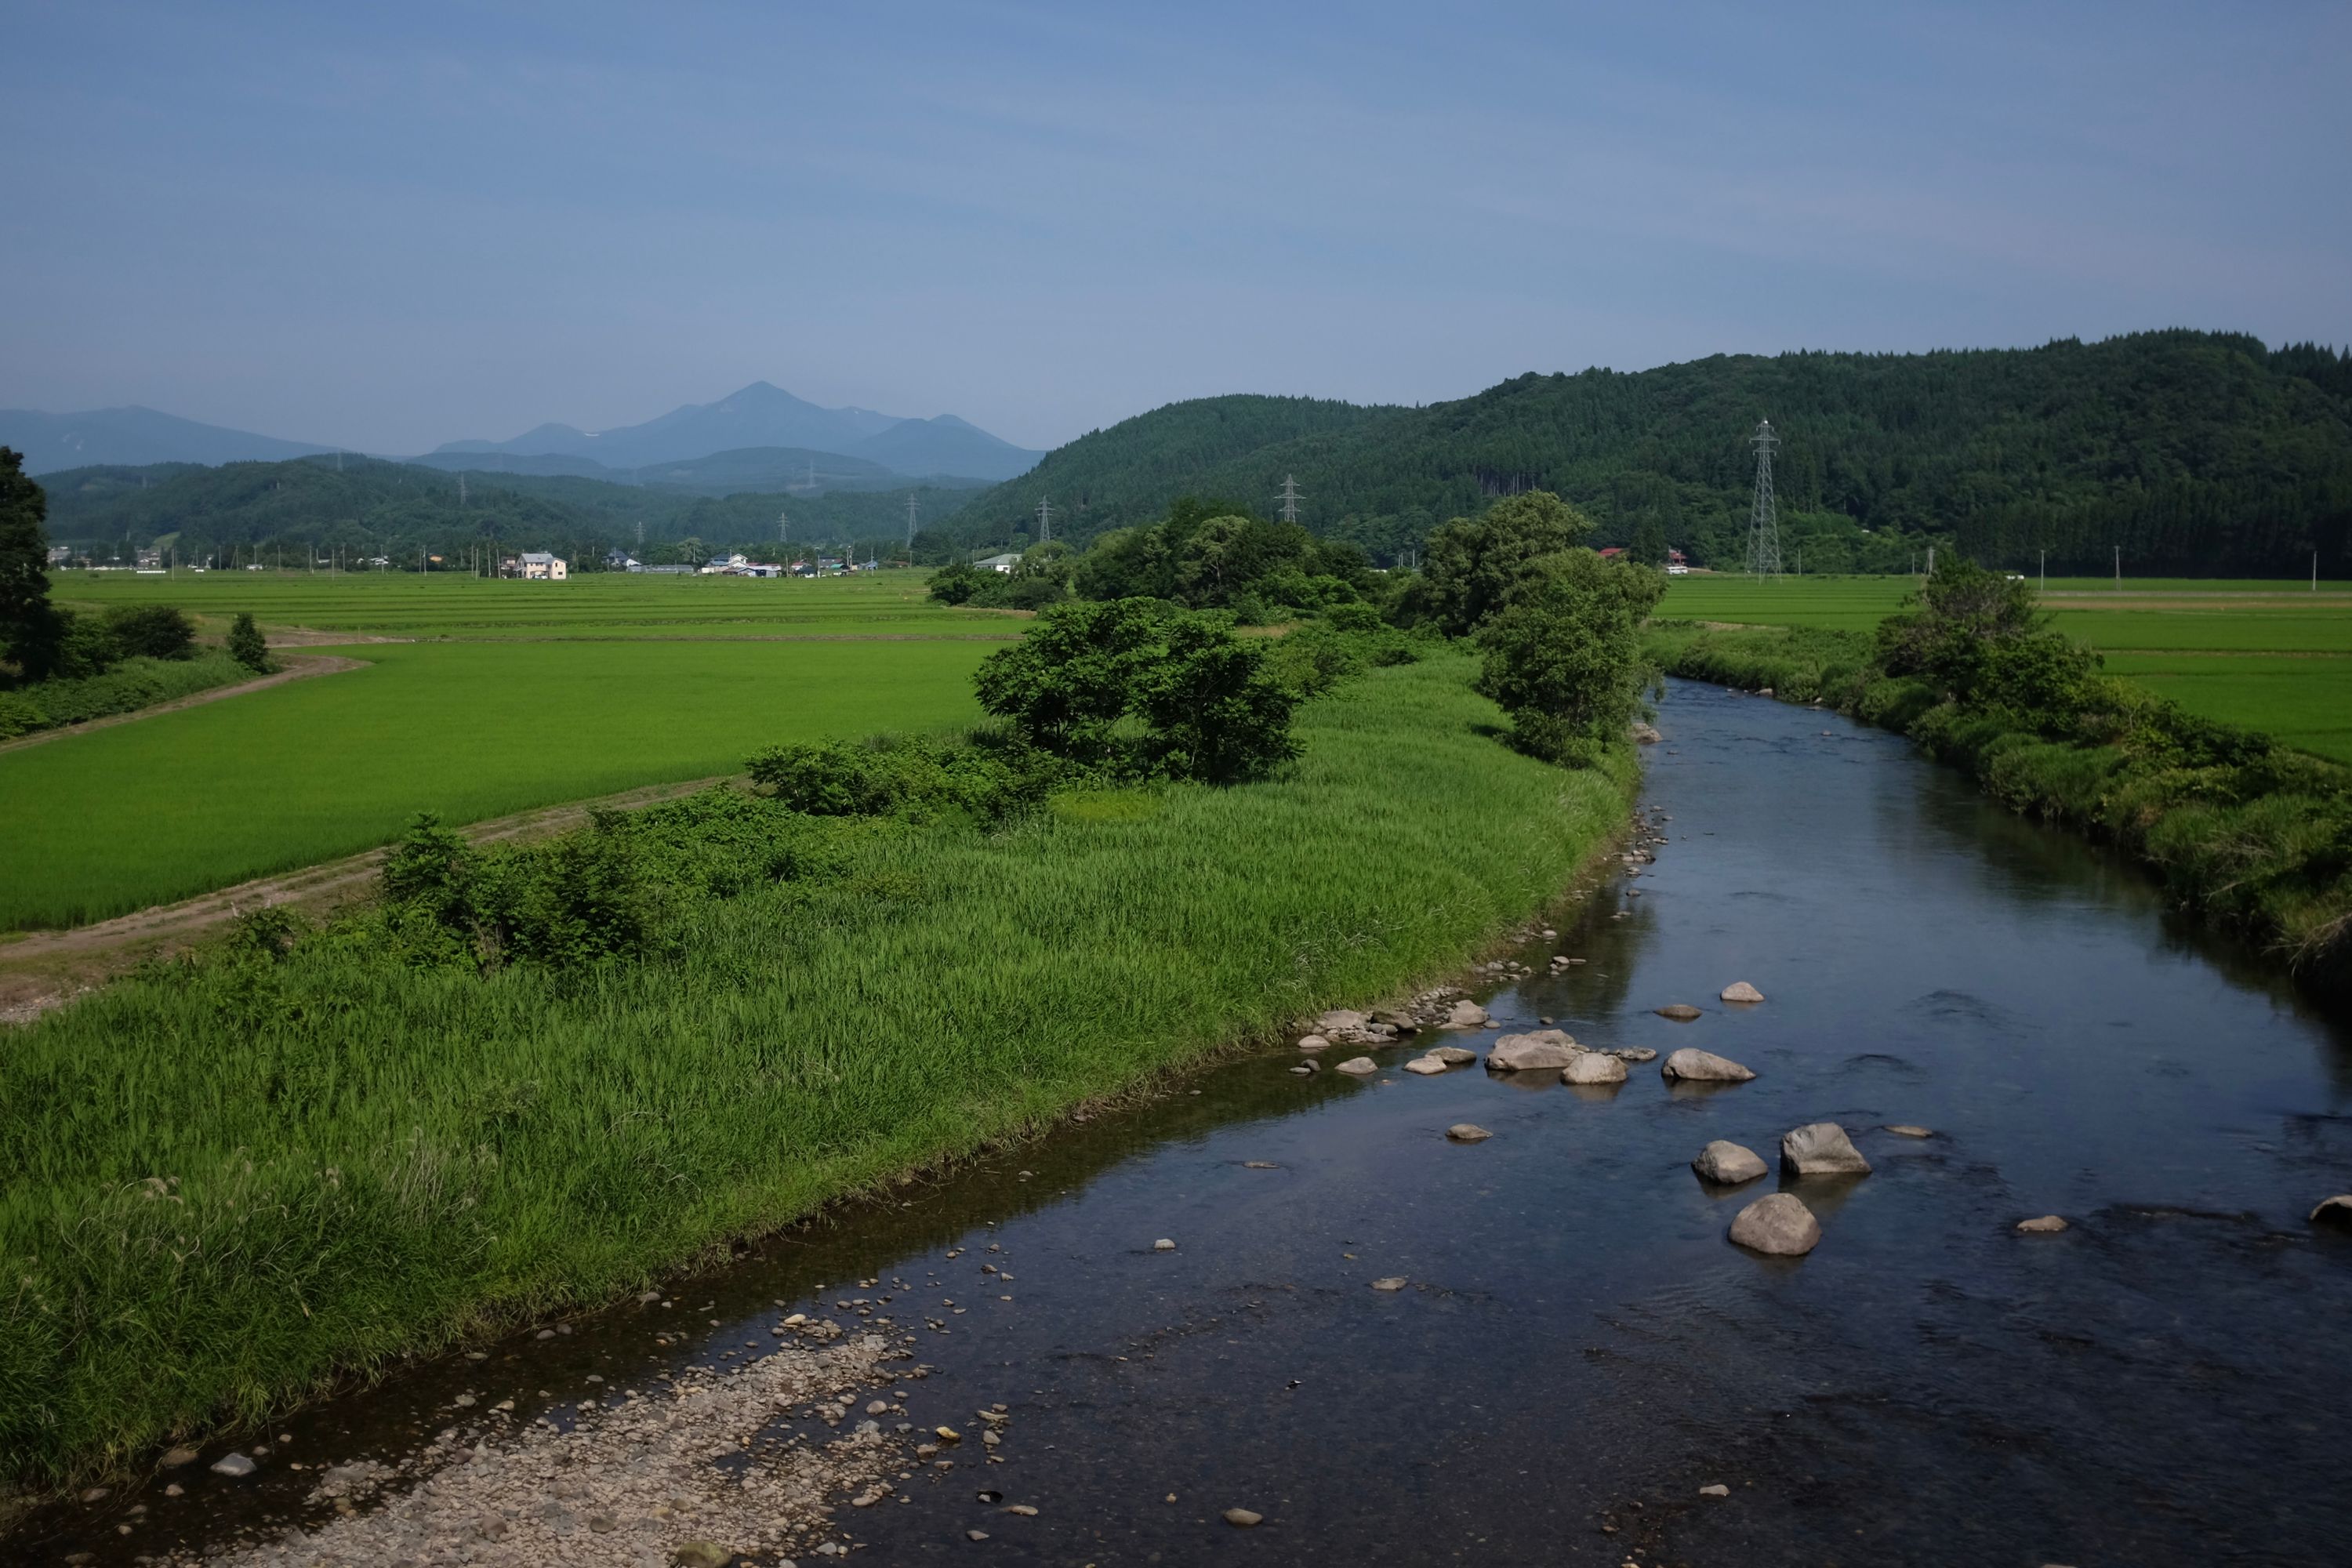 Beyond a river and green rice fields, the Hakkōda Mountains rise in the distance.